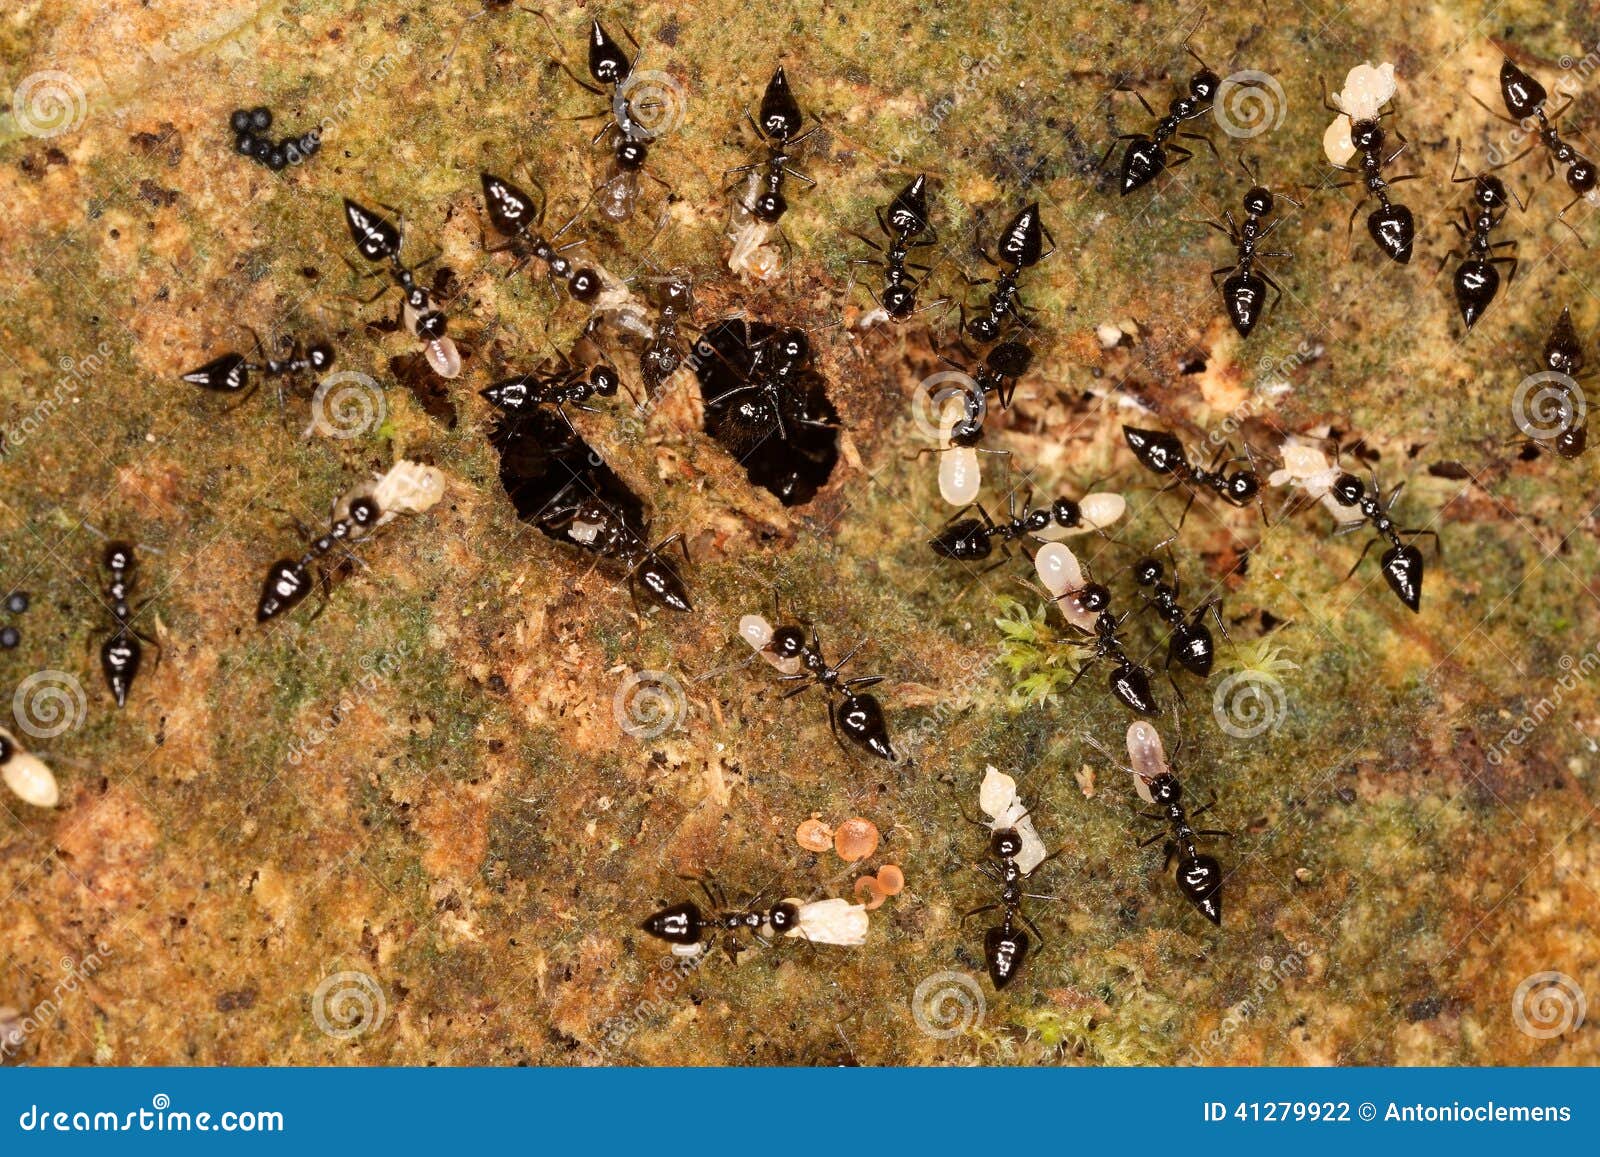 the caring ants regularly ventilate their larvae.